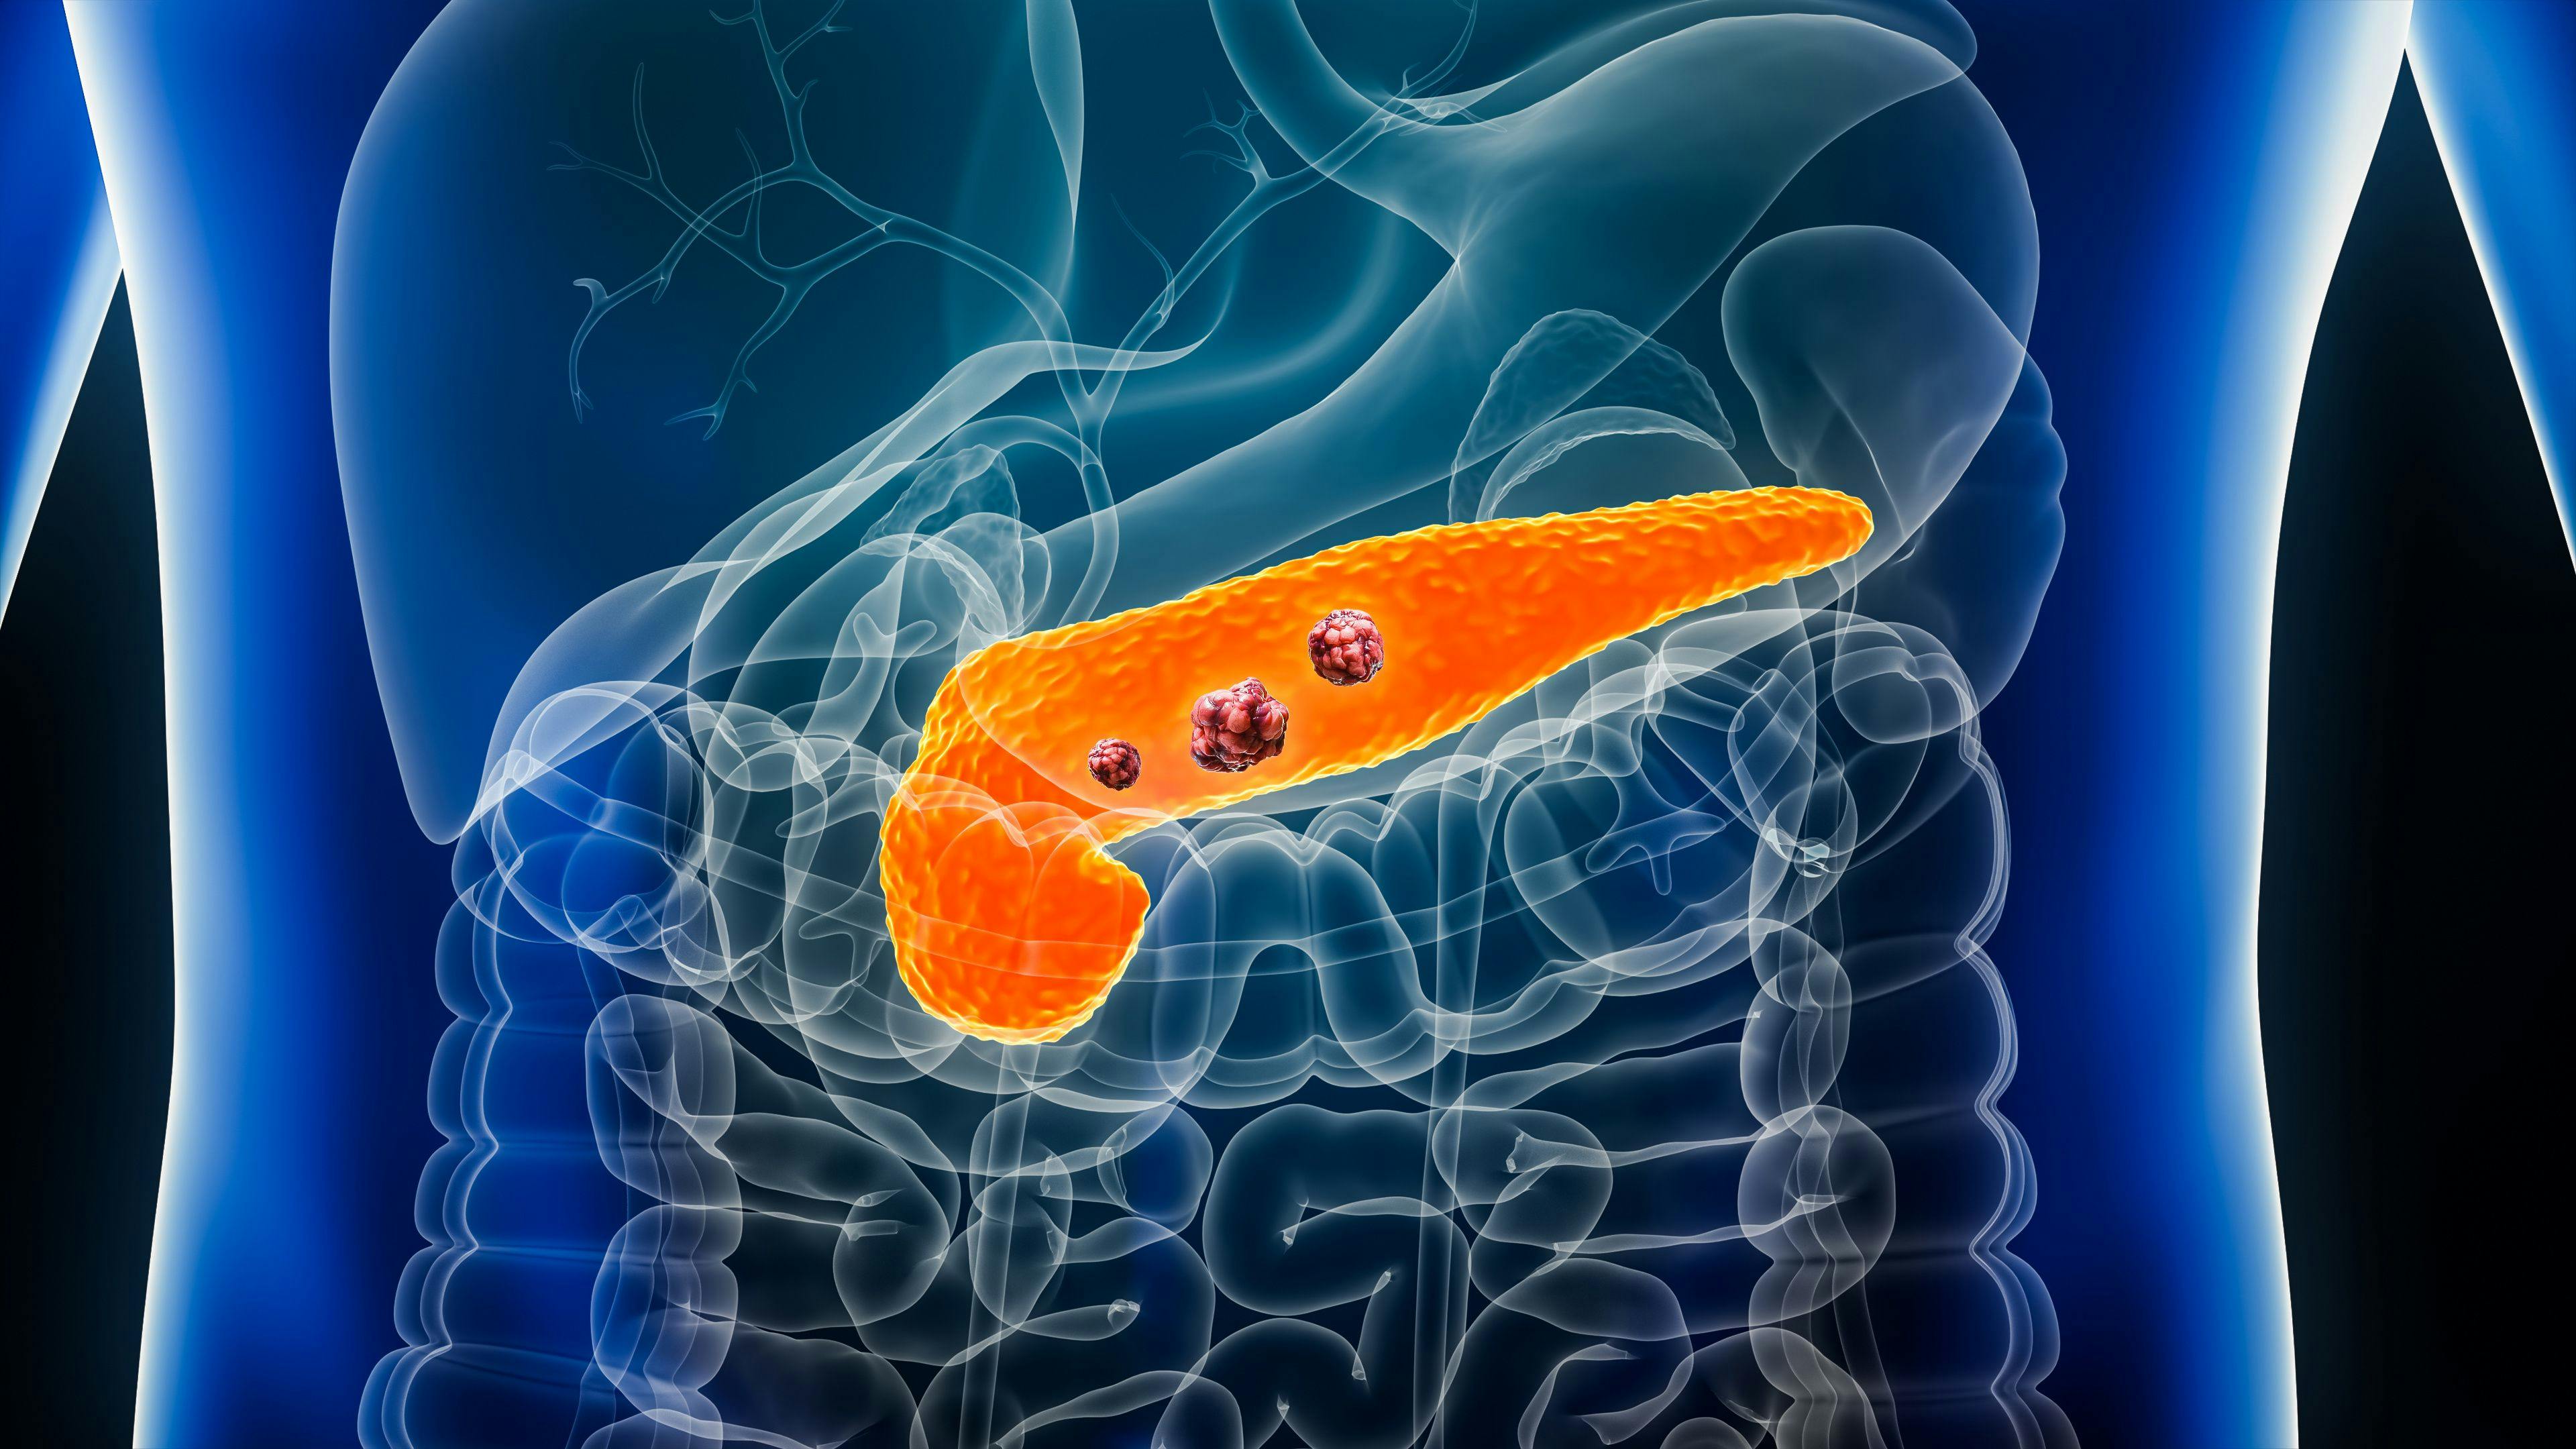 Pancreas or pancreatic cancer with organs and tumors or cancerous cells 3D rendering illustration with male body. Anatomy, oncology, disease, medical: © matthieu - stock.adobe.com